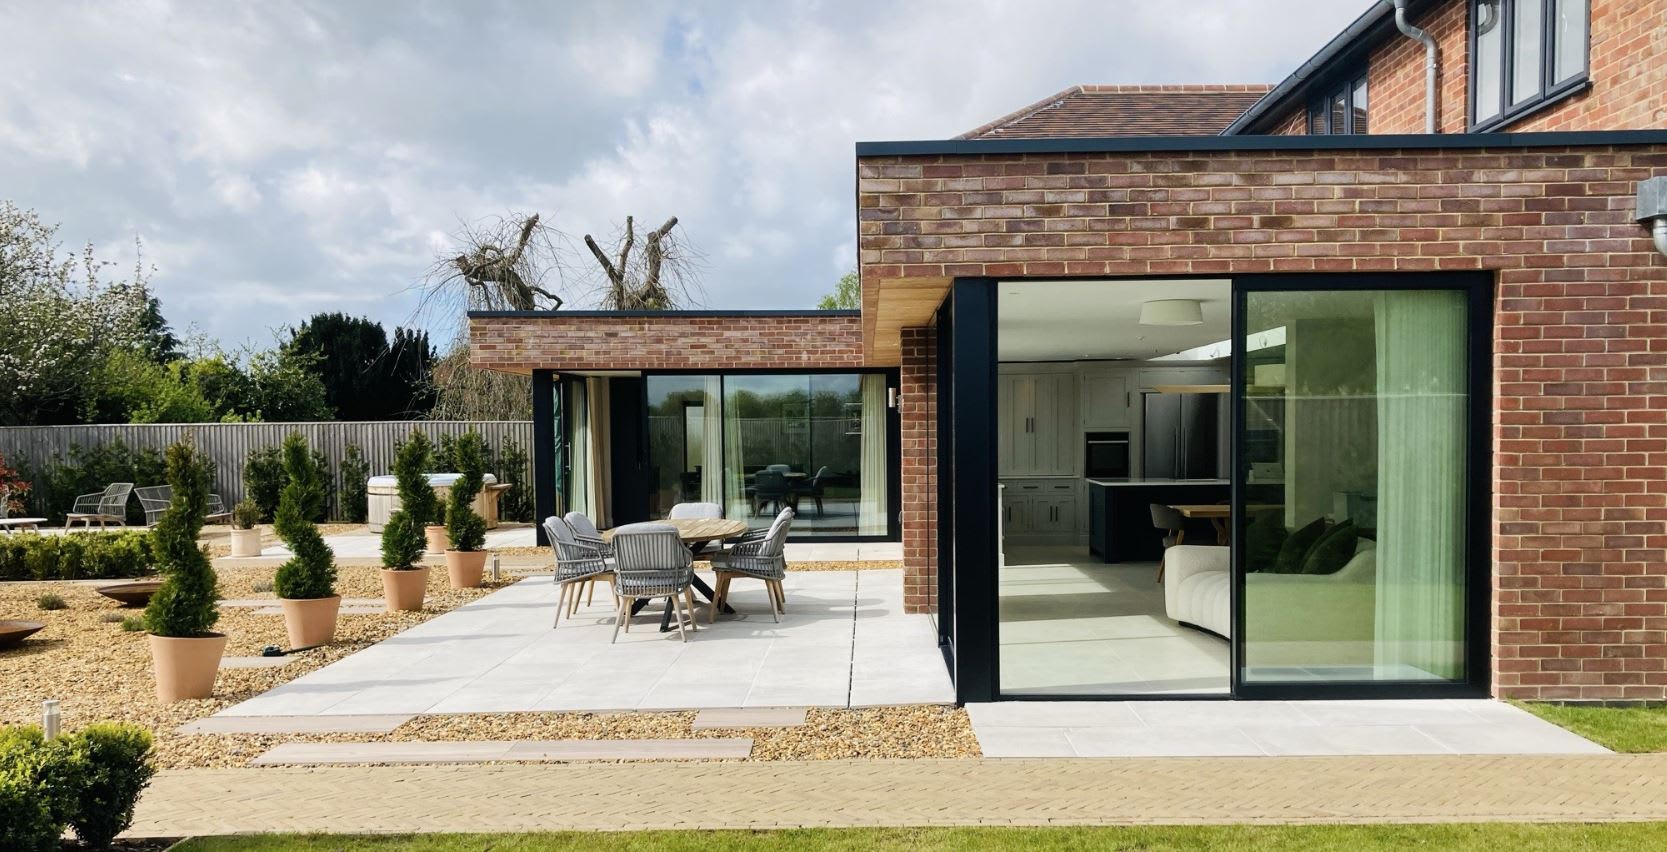 Images Lewis Critchley Architects